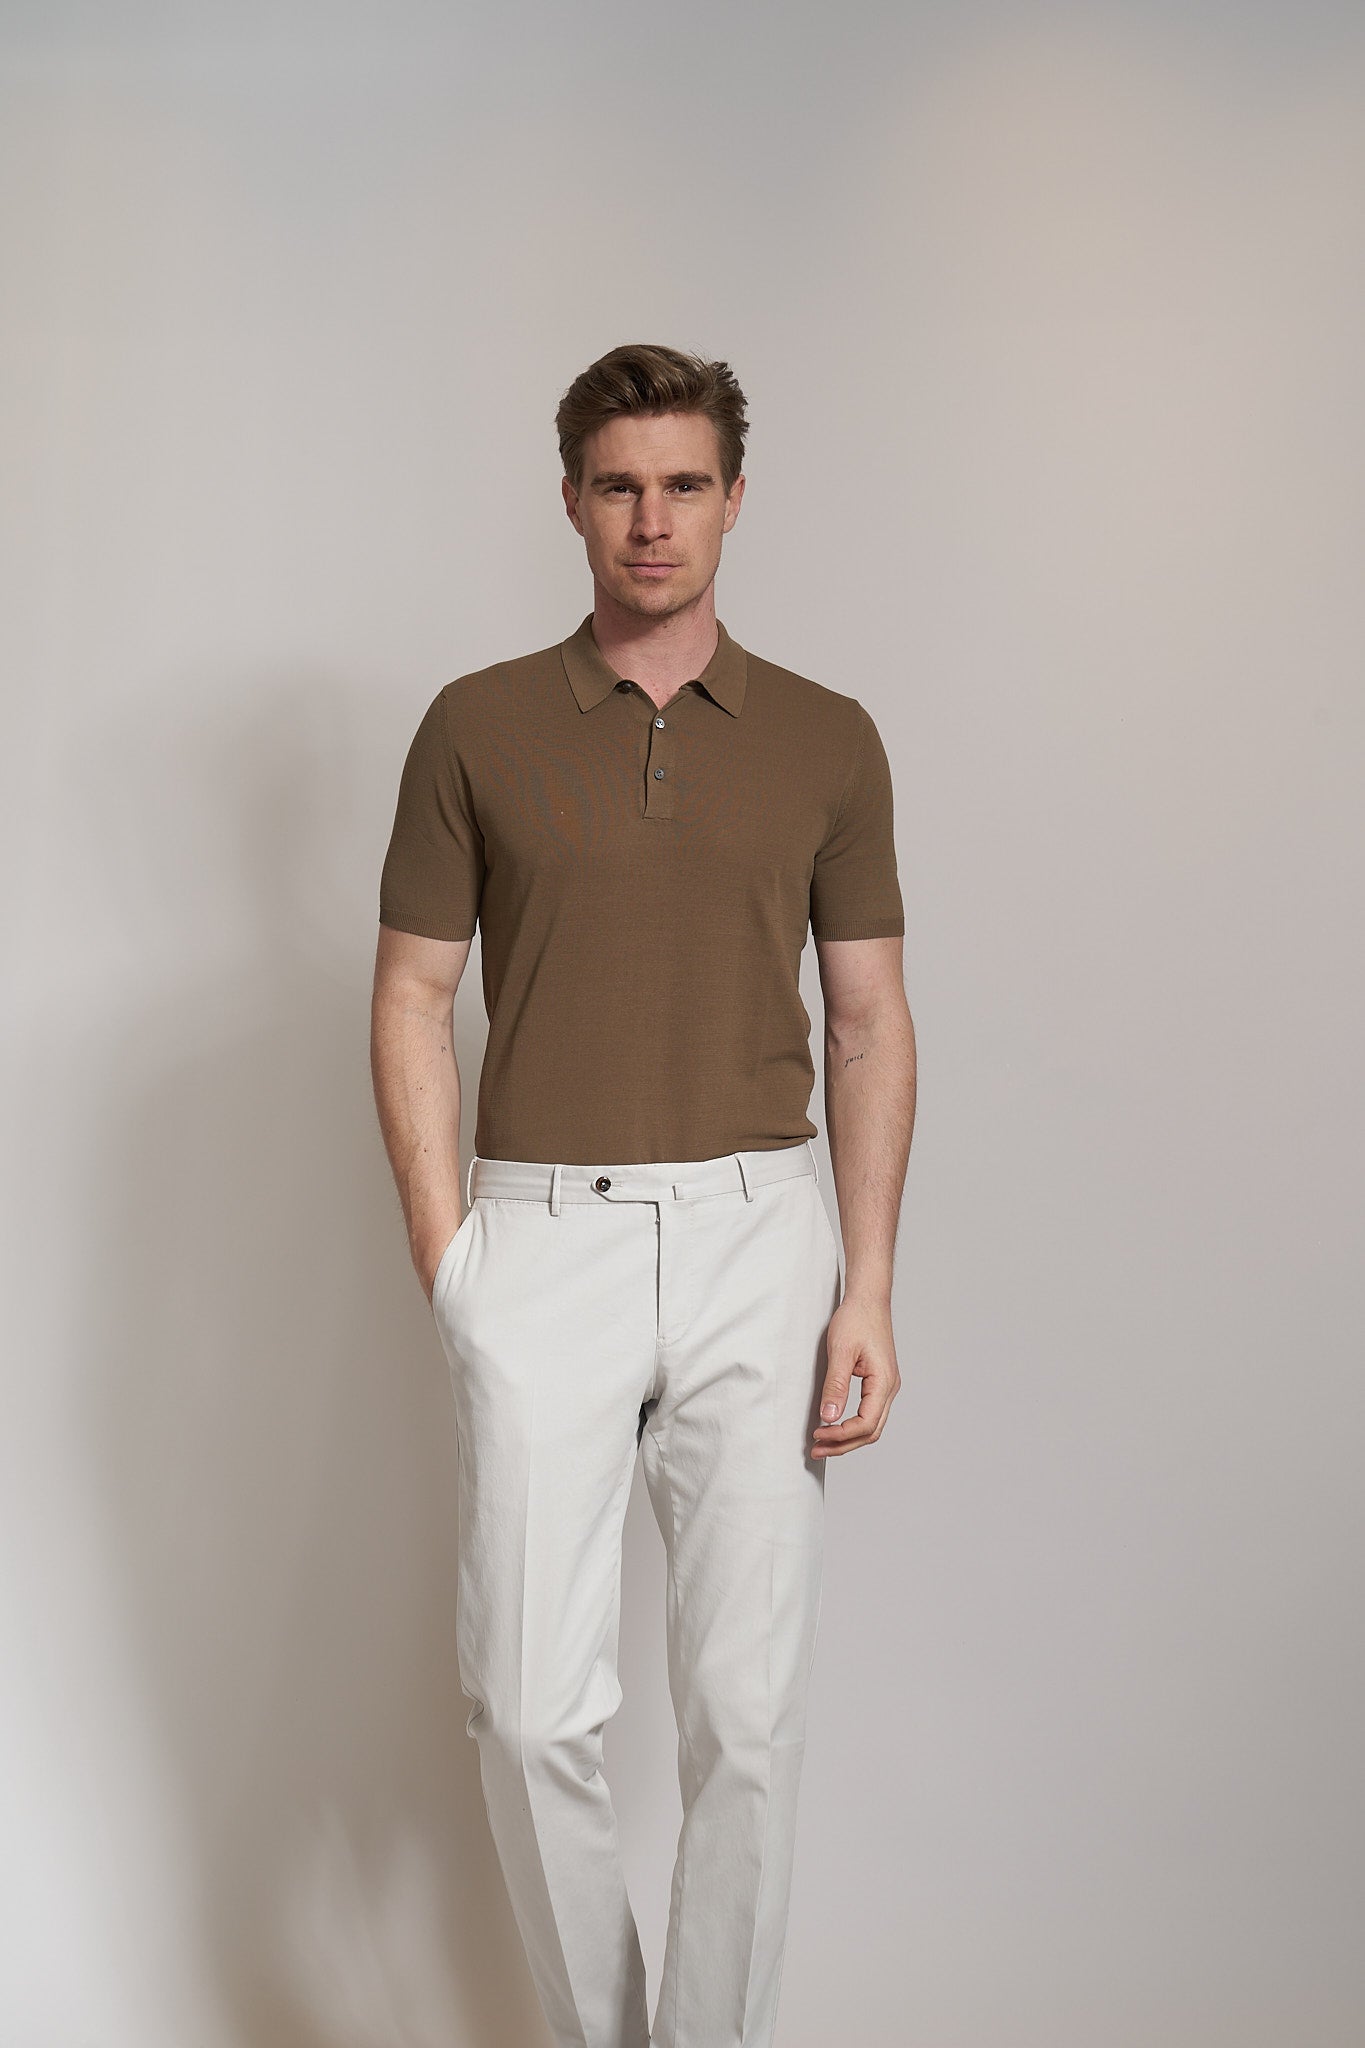 Polo shirt in brown